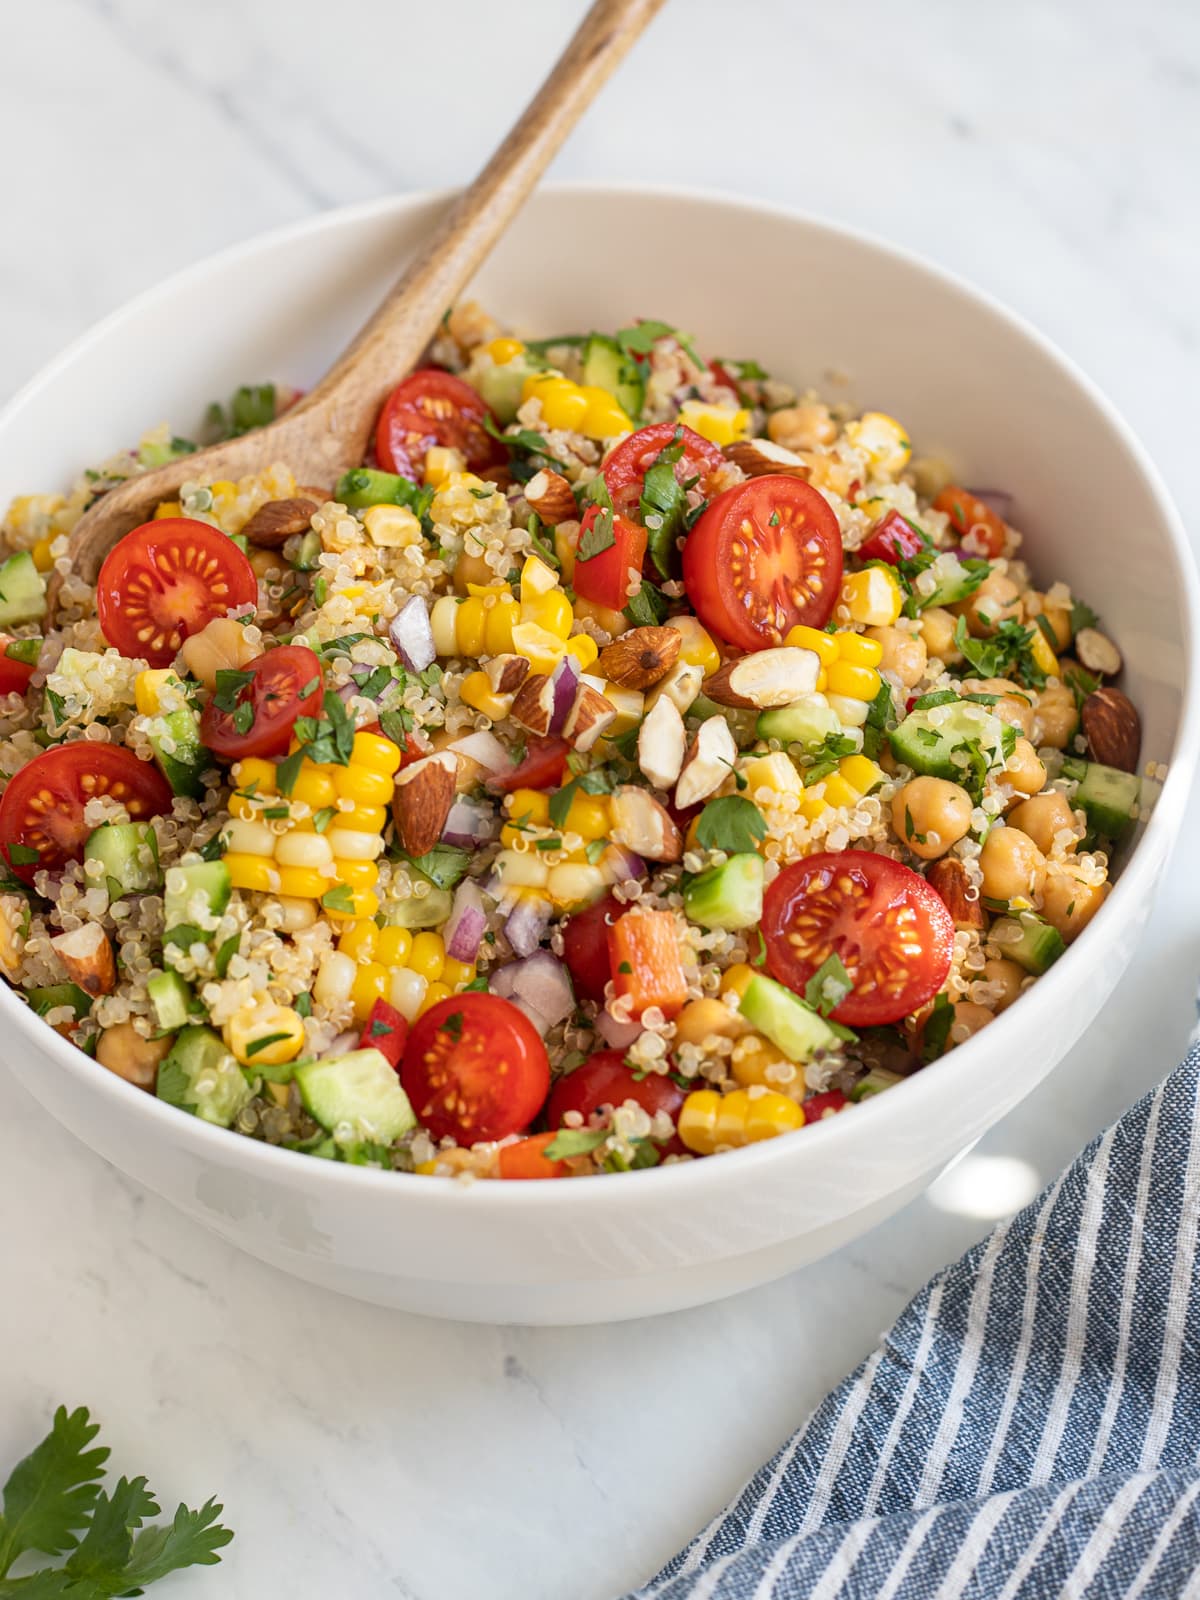 Bowl of quinoa and veggie salad with corn and tomatoes.